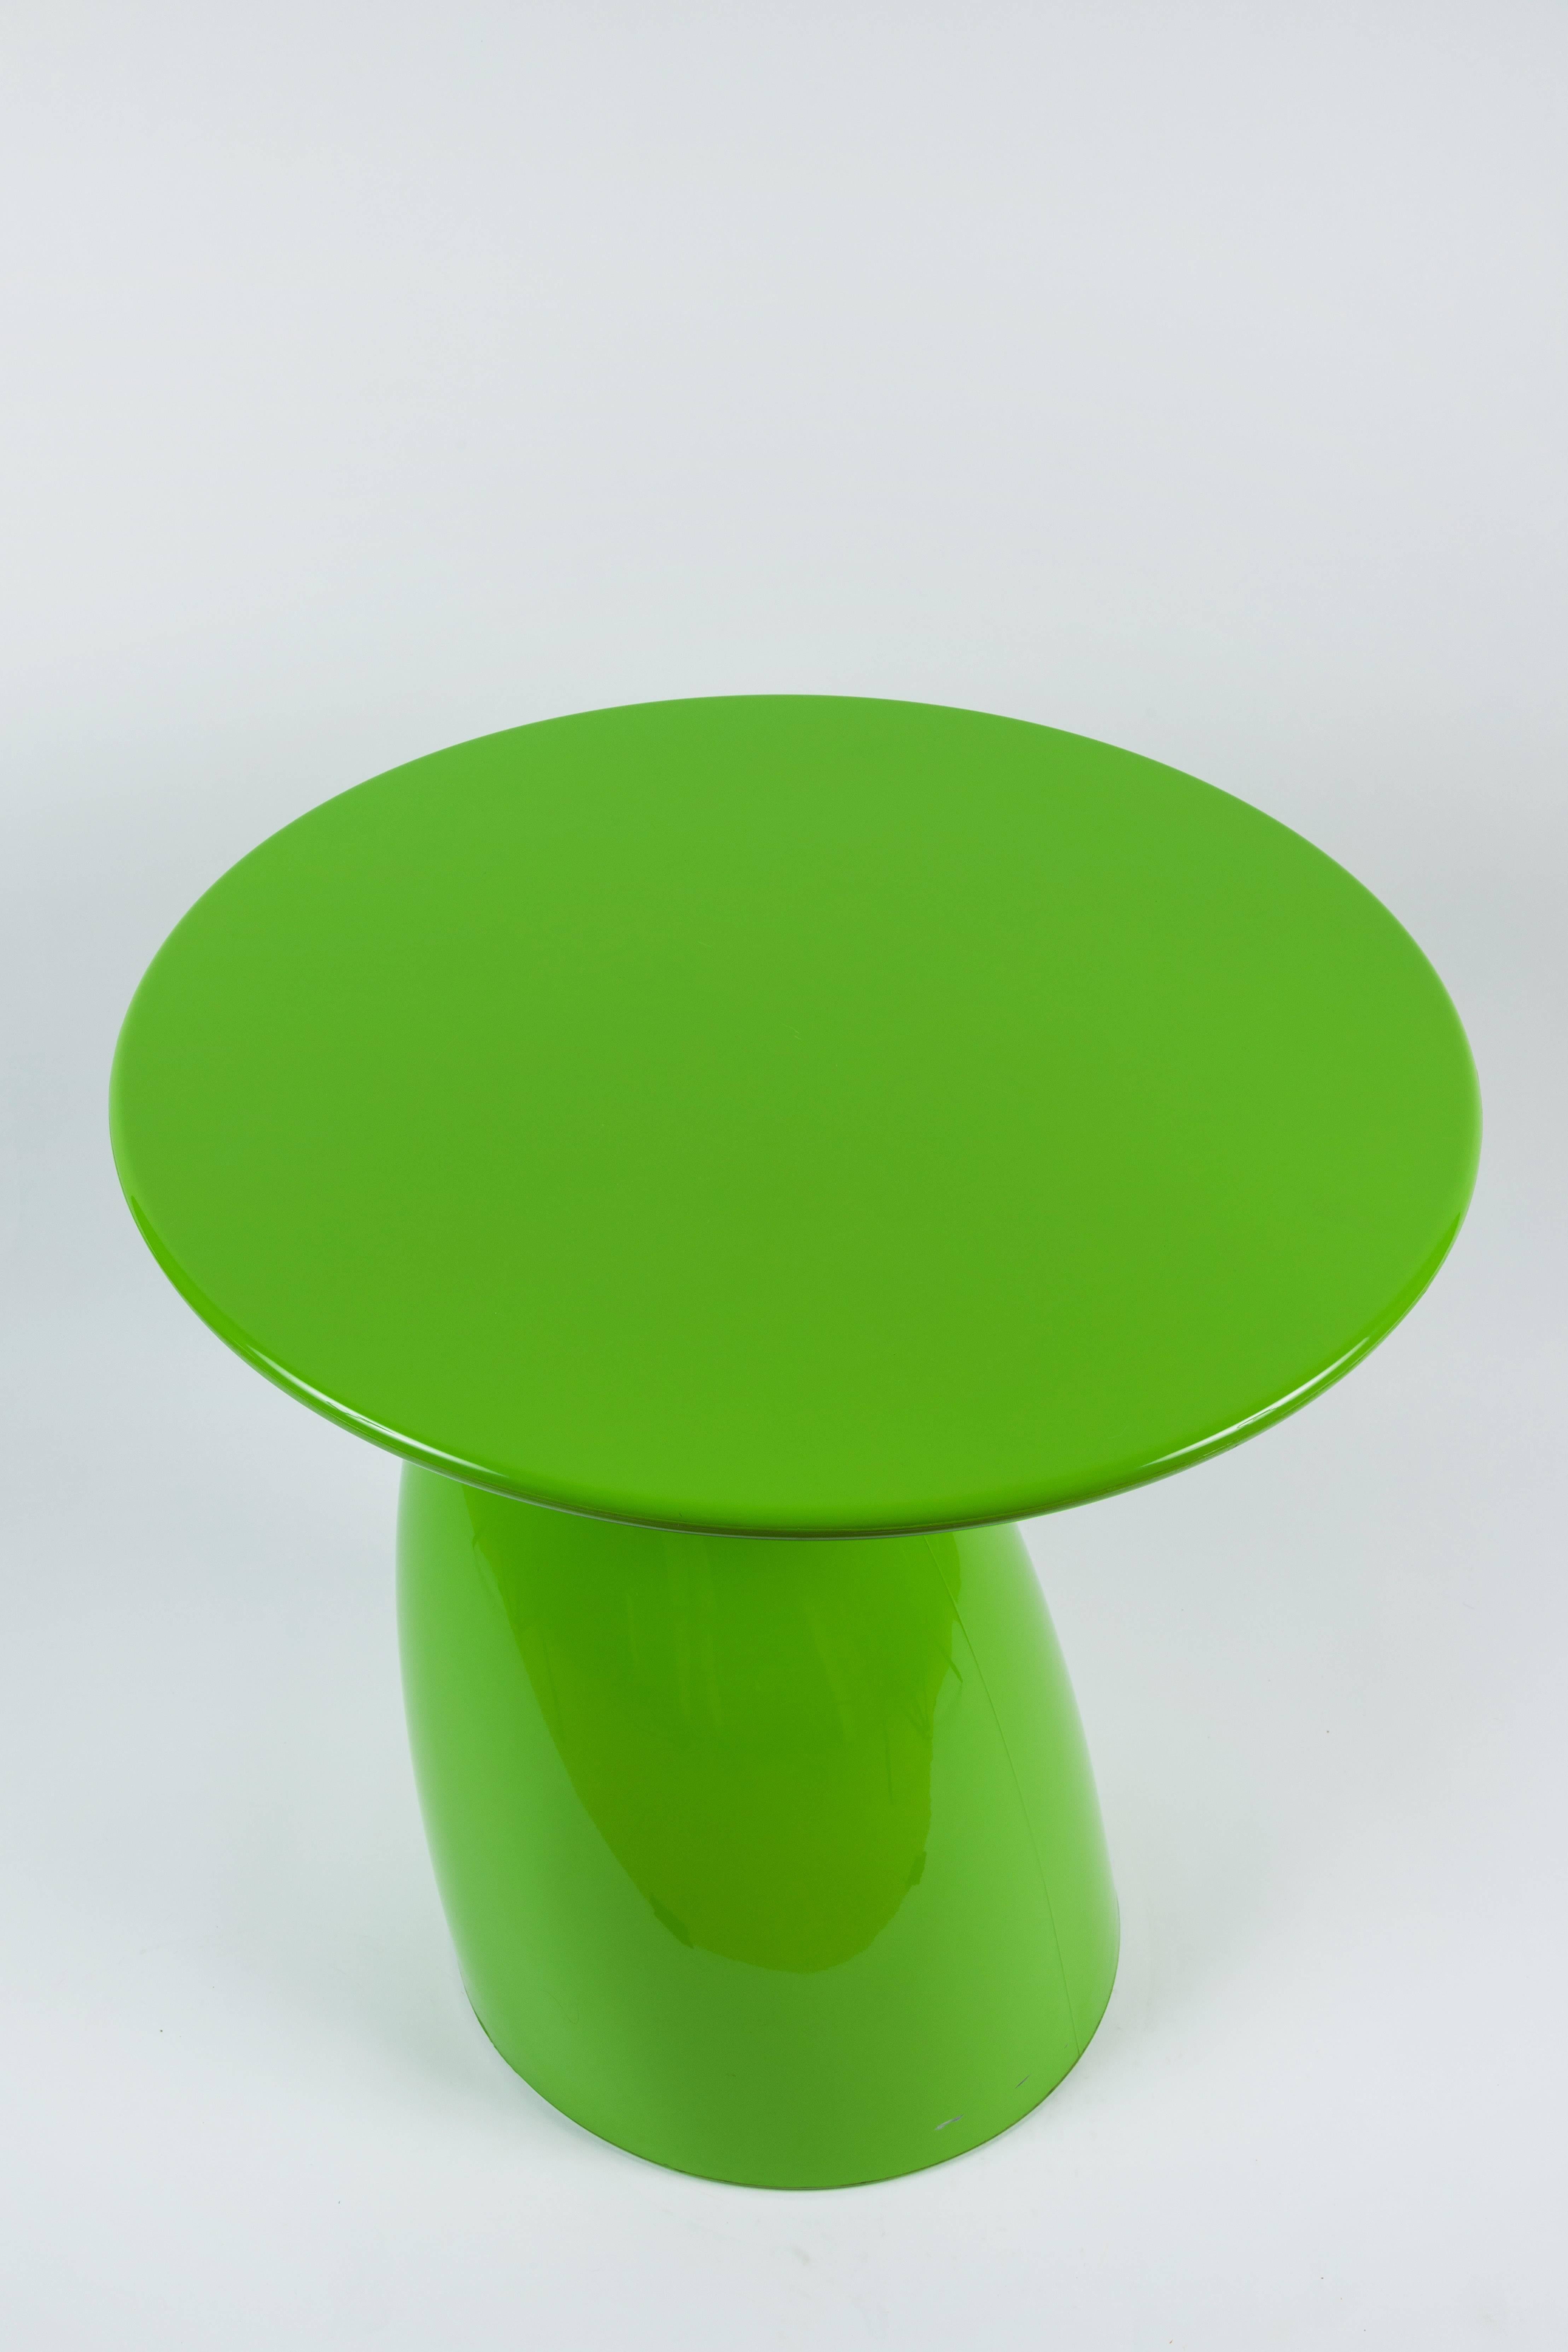 Modern Wendell Castle Style Green Sculptural Side Table